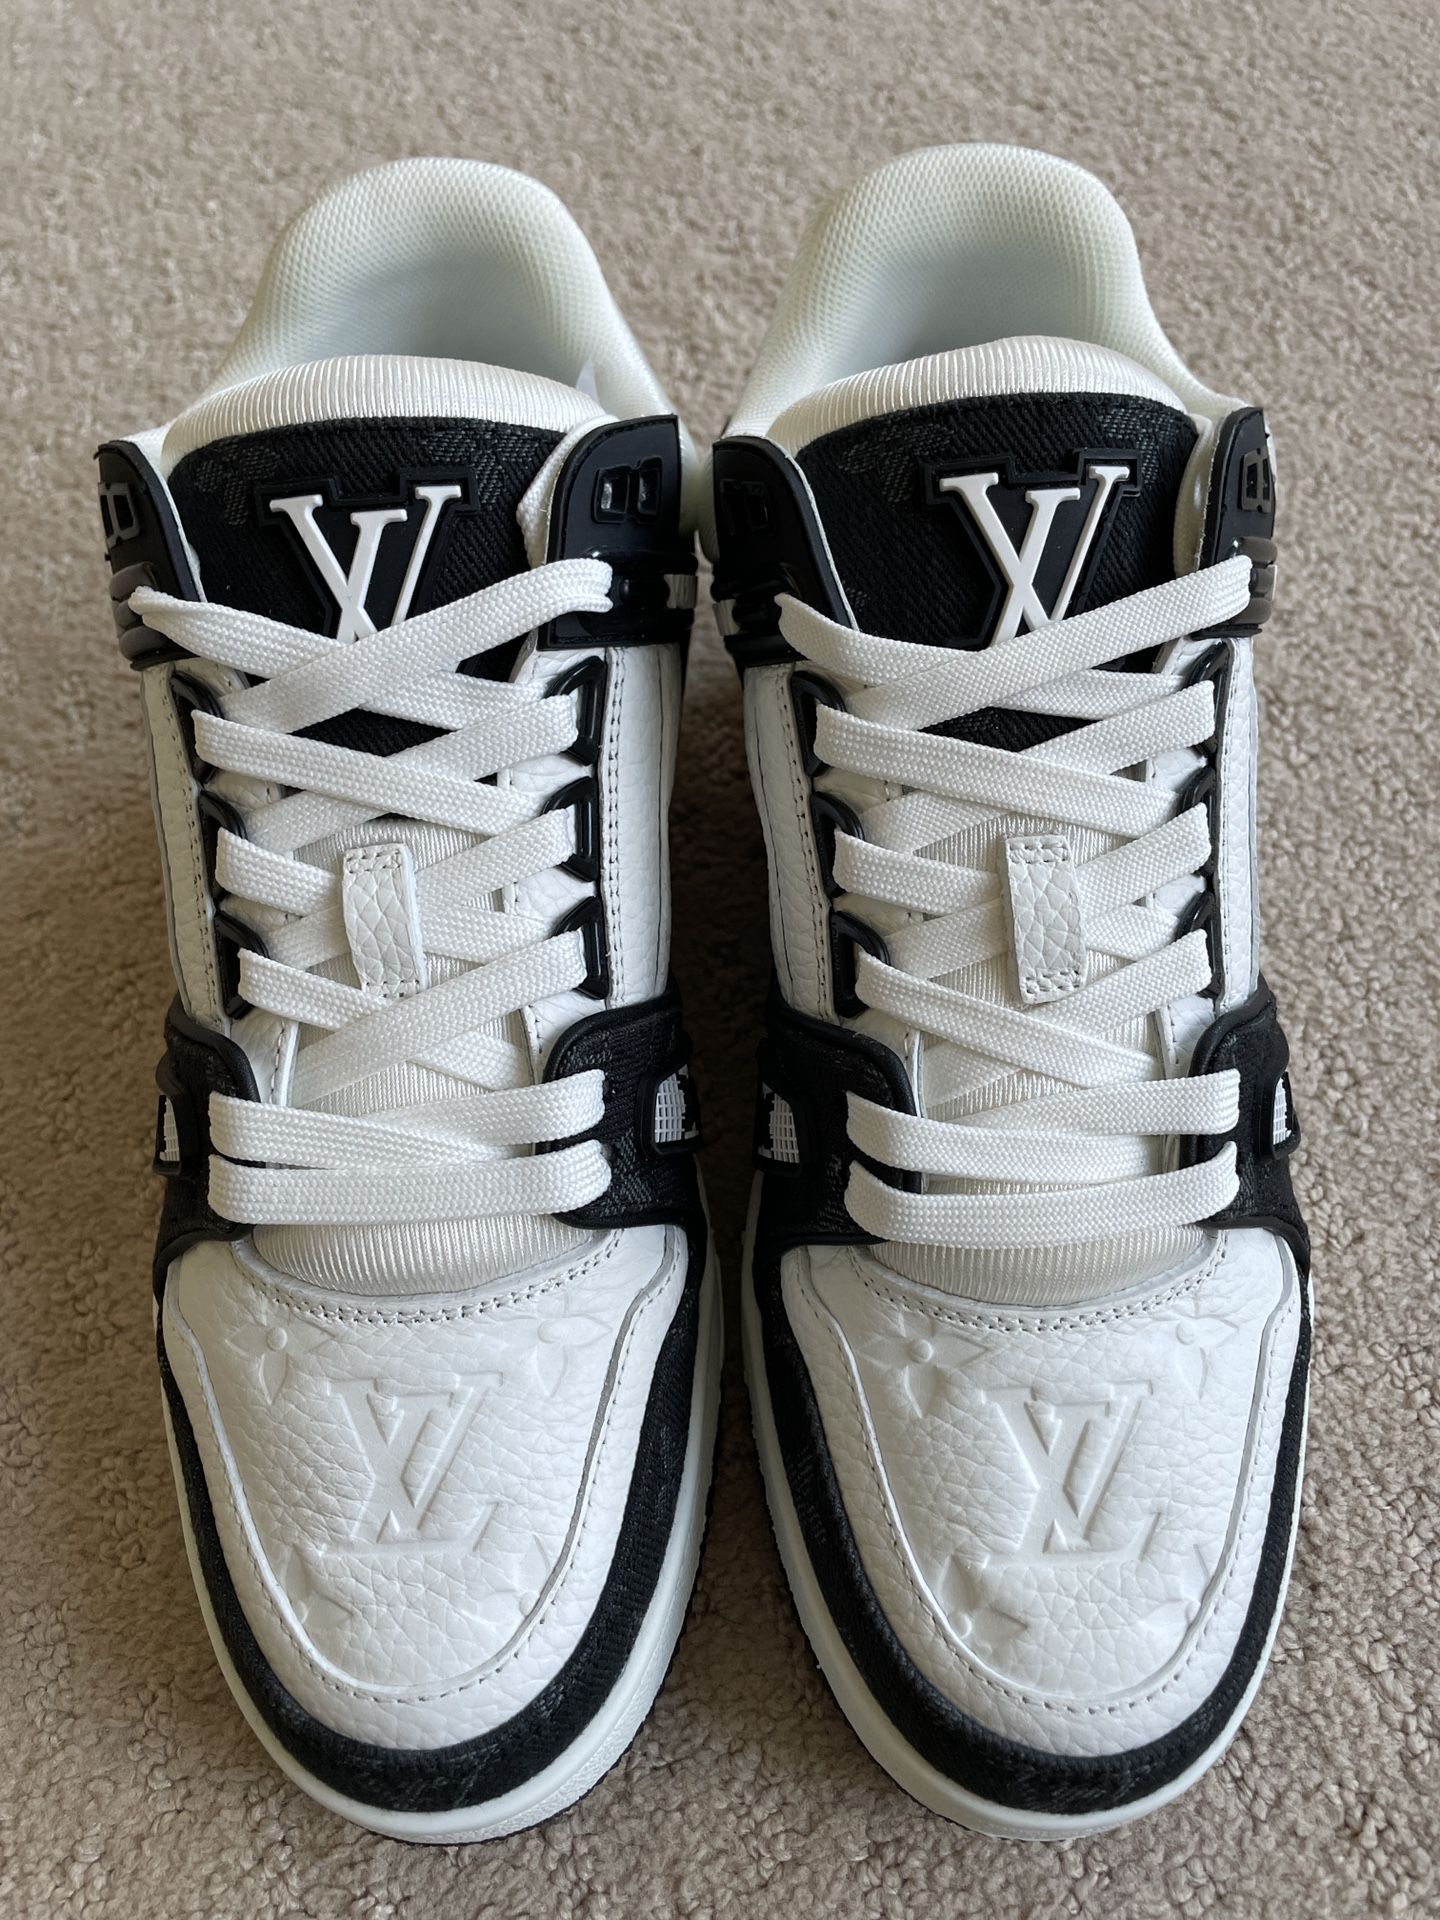 Women's New Louis Vuitton Virgil Abloh Denim Sneakers Size 7 for Sale in  Beverly Hills, CA - OfferUp